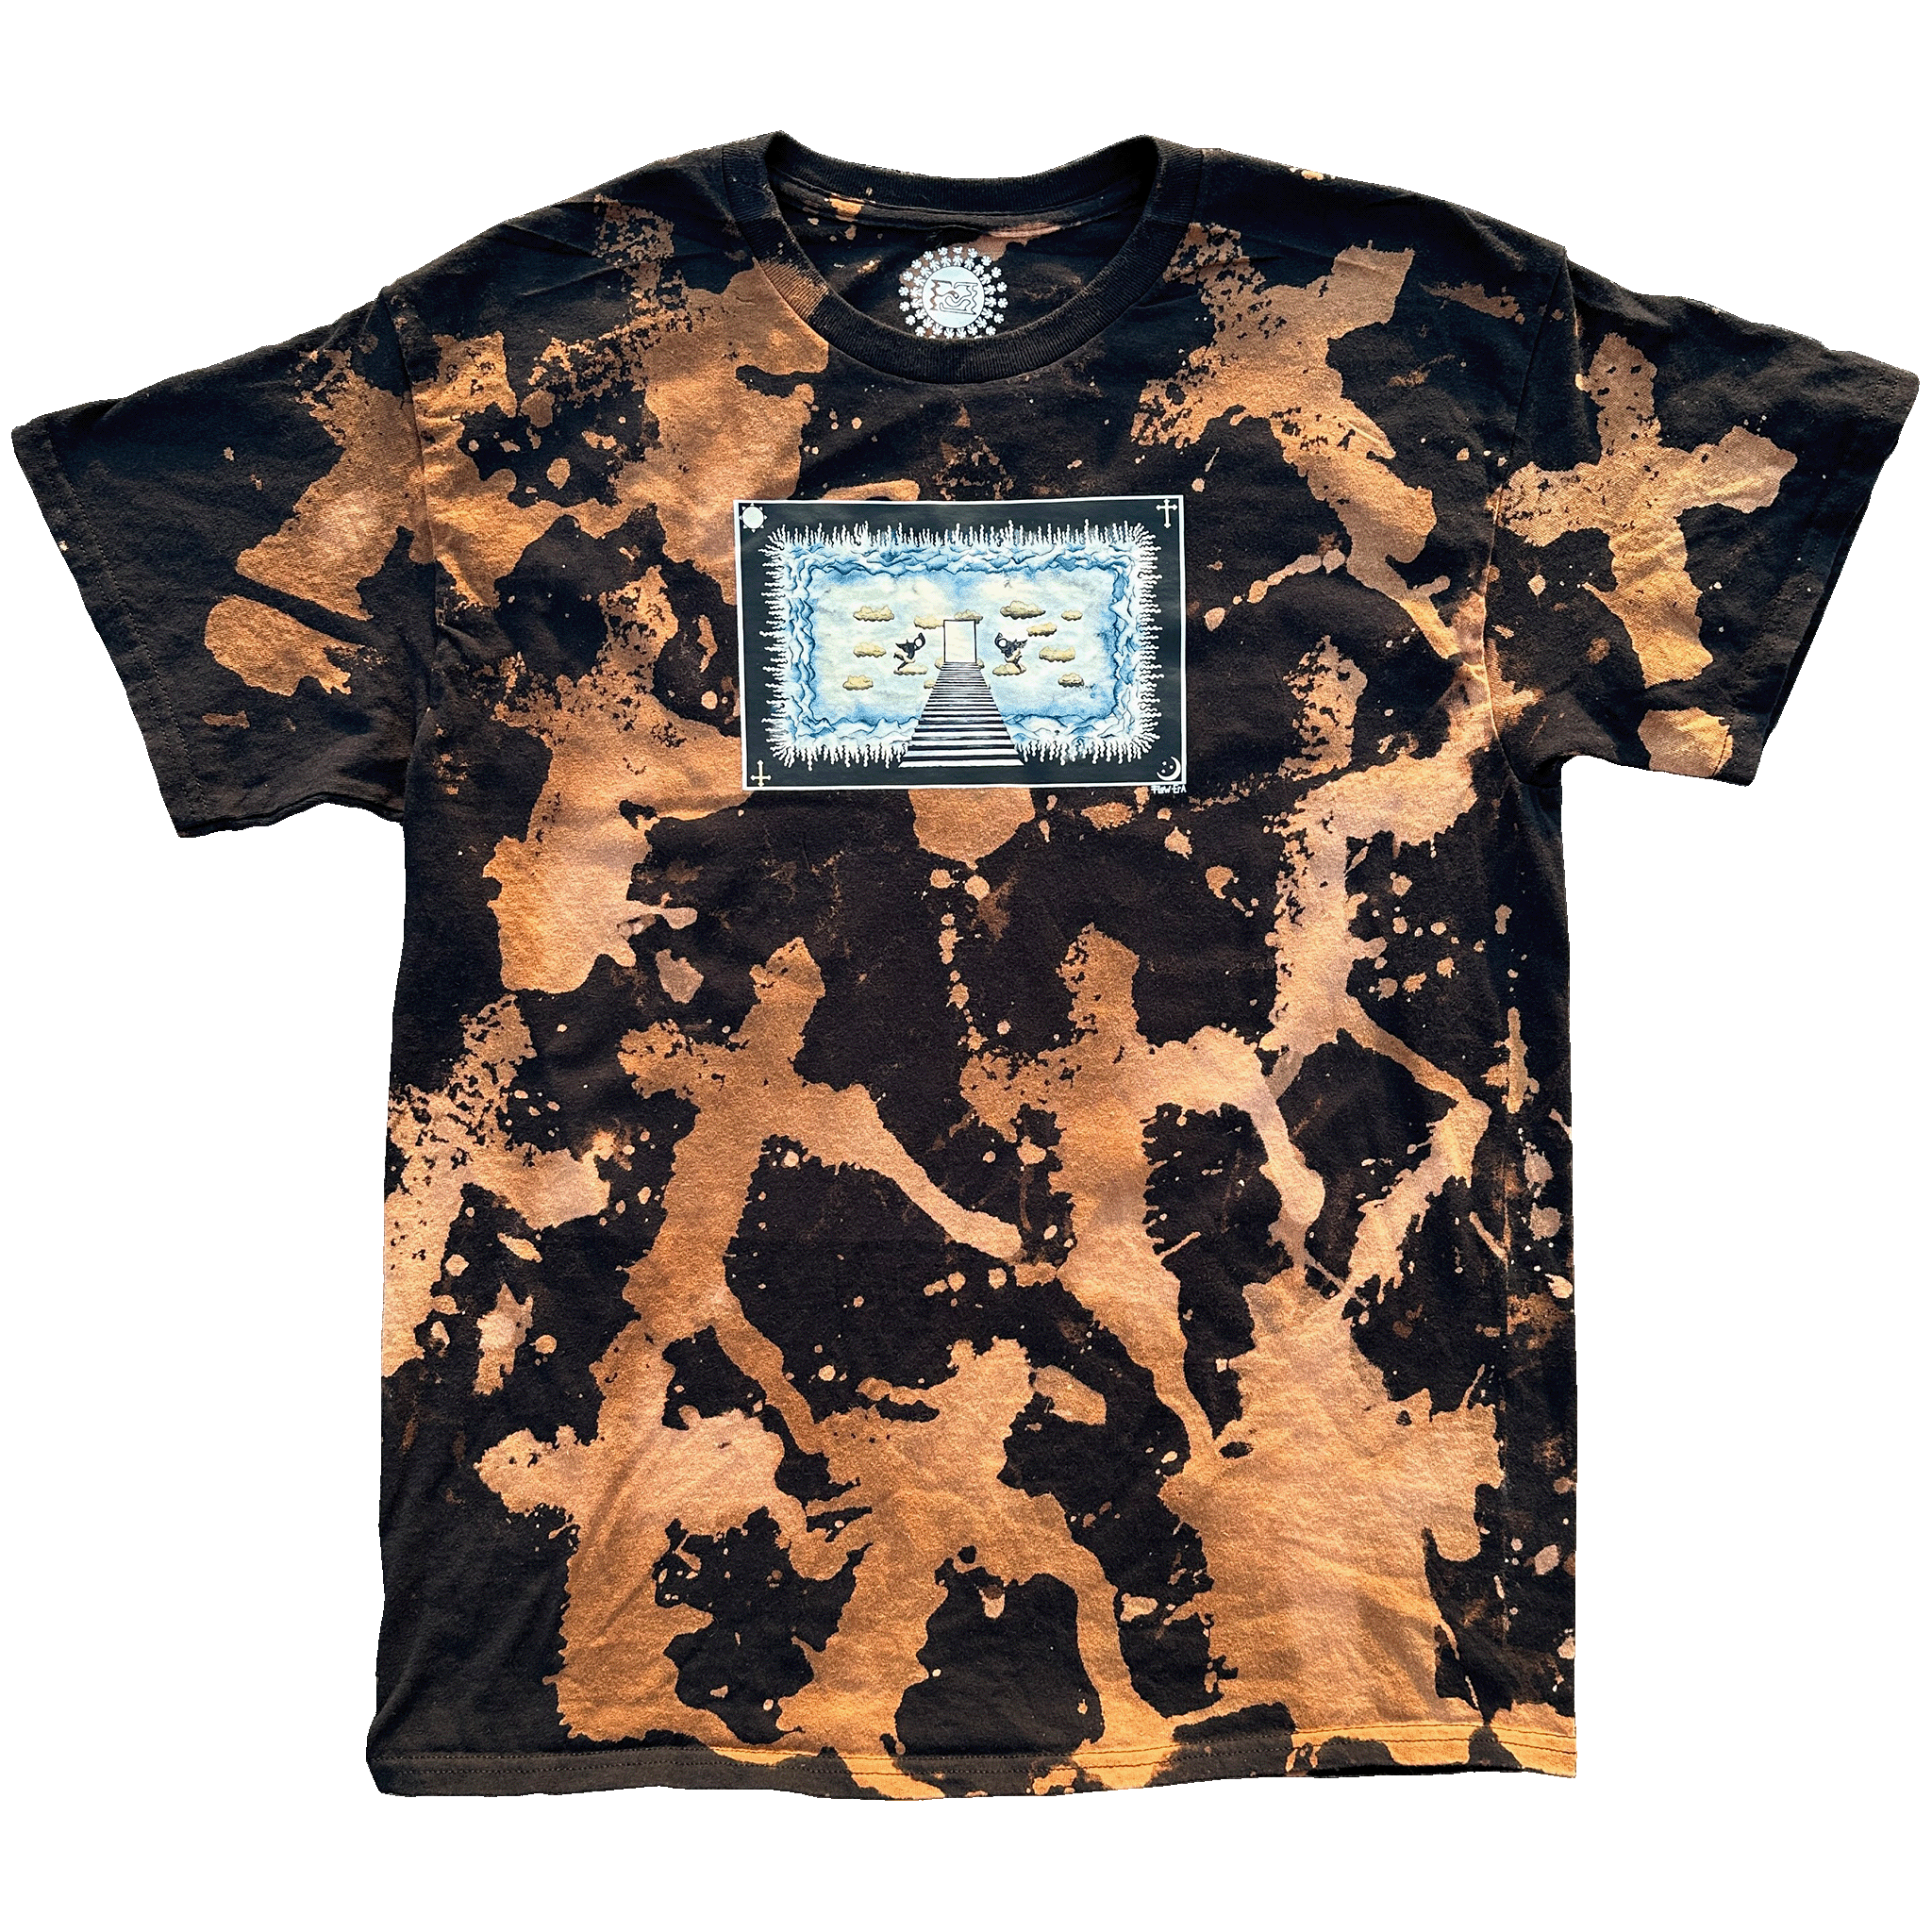 Out of the Darkness and Into the Light Sponge Bleached Shirt